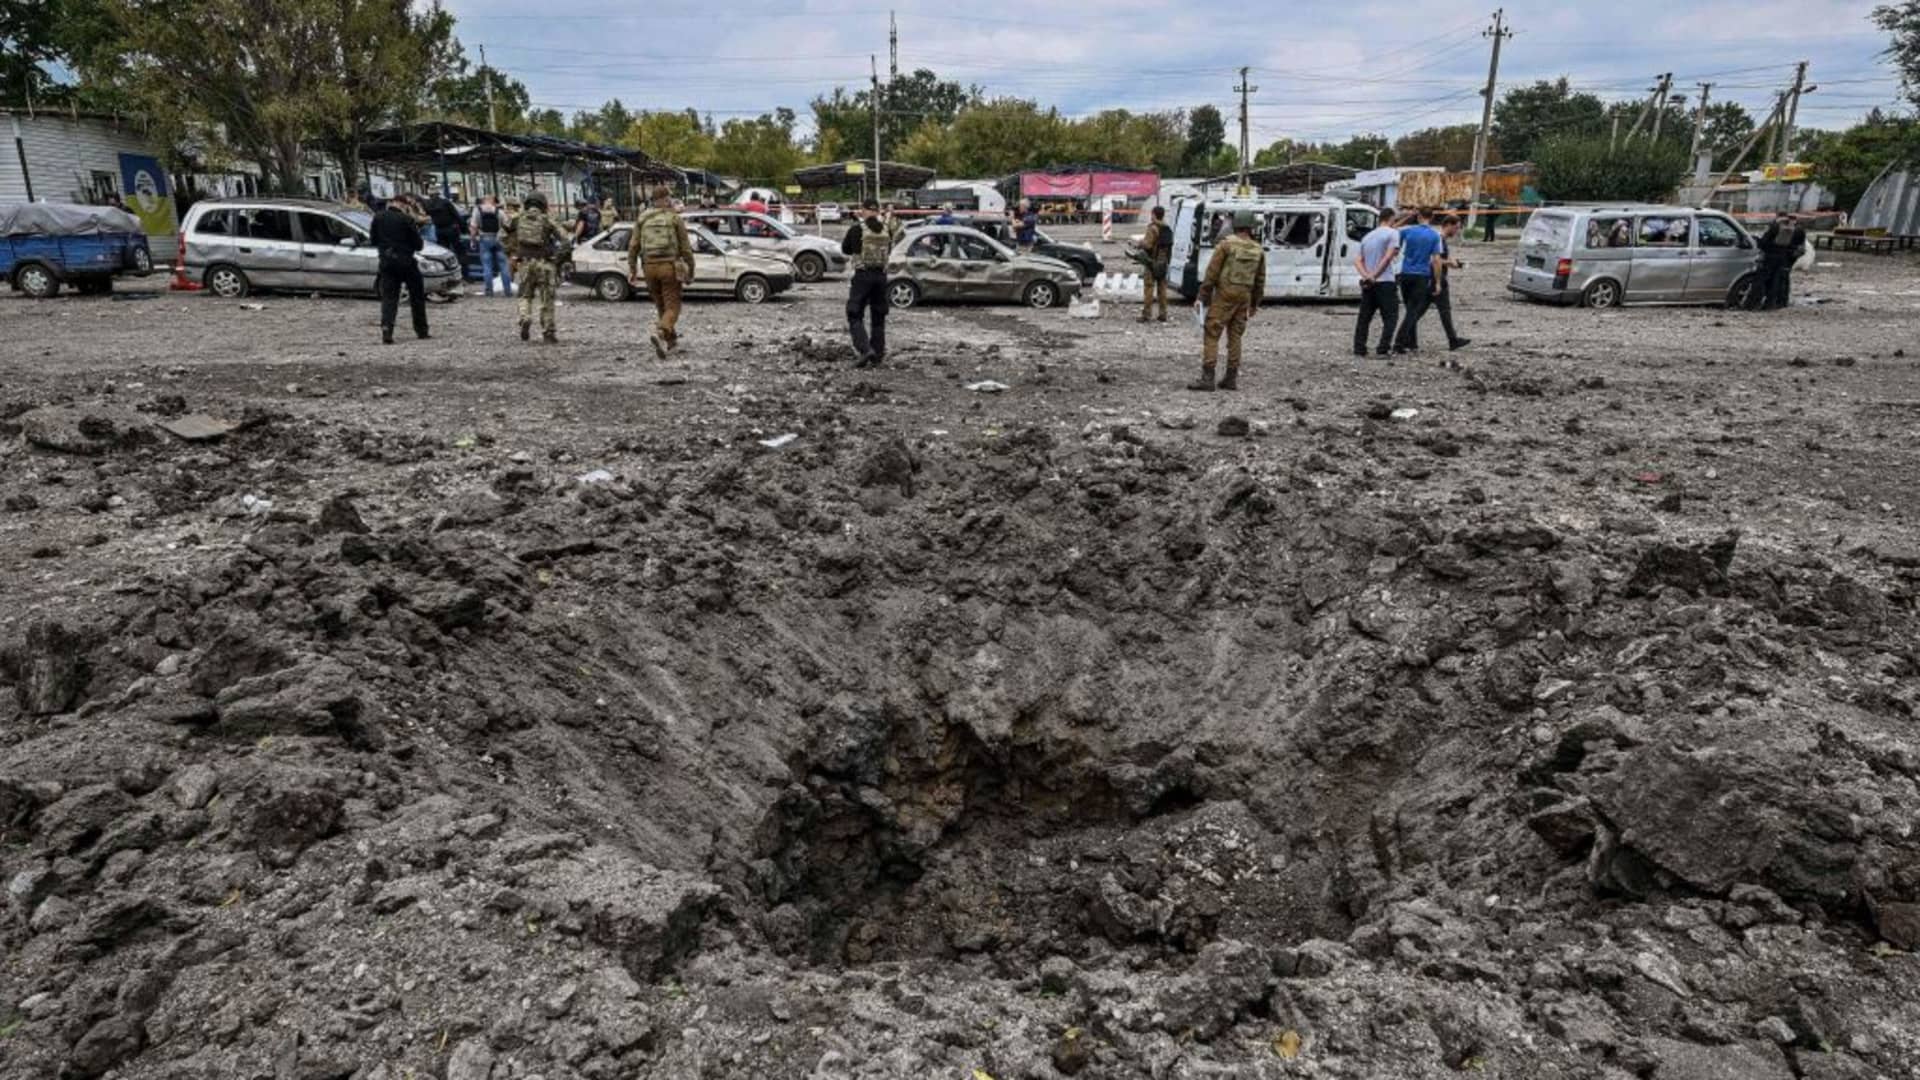 Ukrainian servicemen walk by a crater left by a missile strike near Zaporizhzhia on September 30, 2022, amid the Russian invasion of Ukraine.